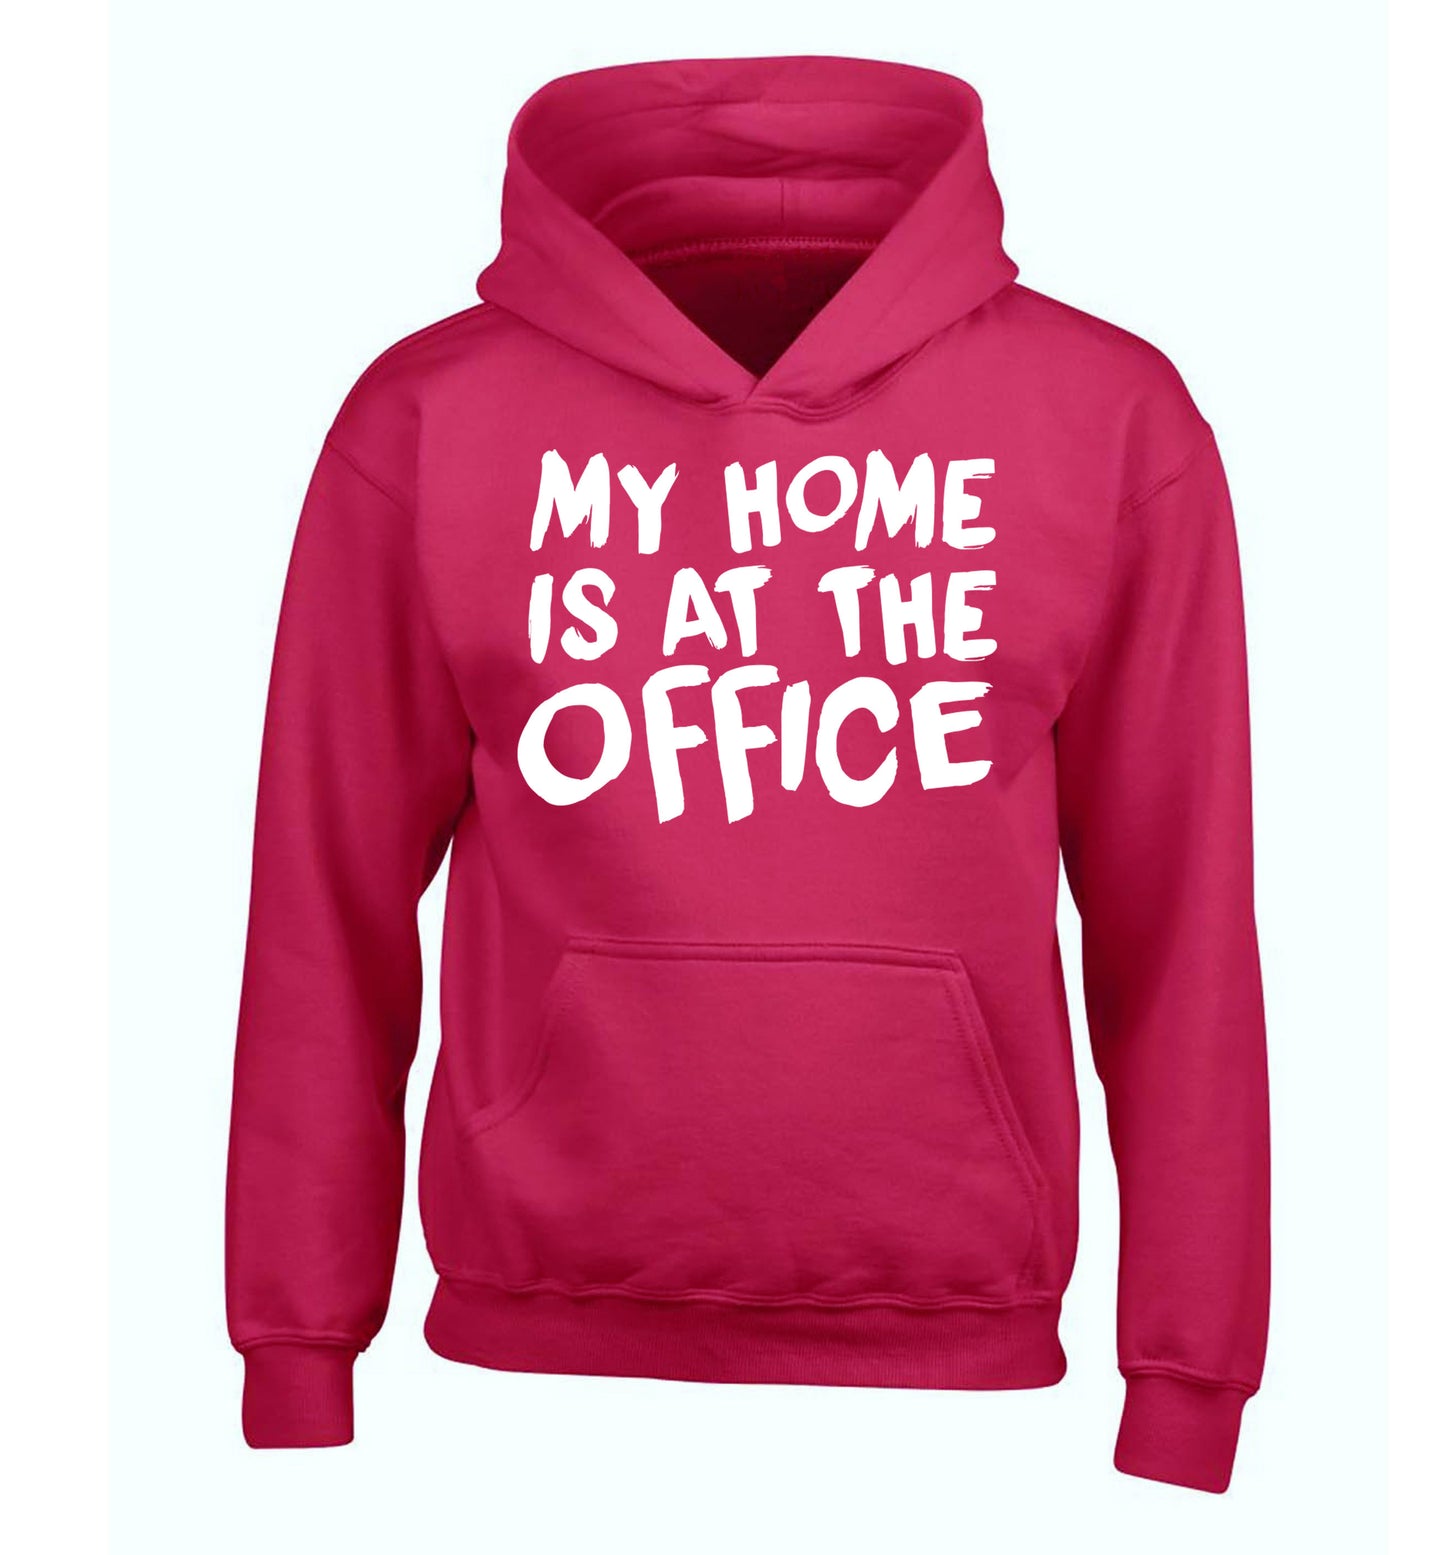 My home is at the office children's pink hoodie 12-14 Years